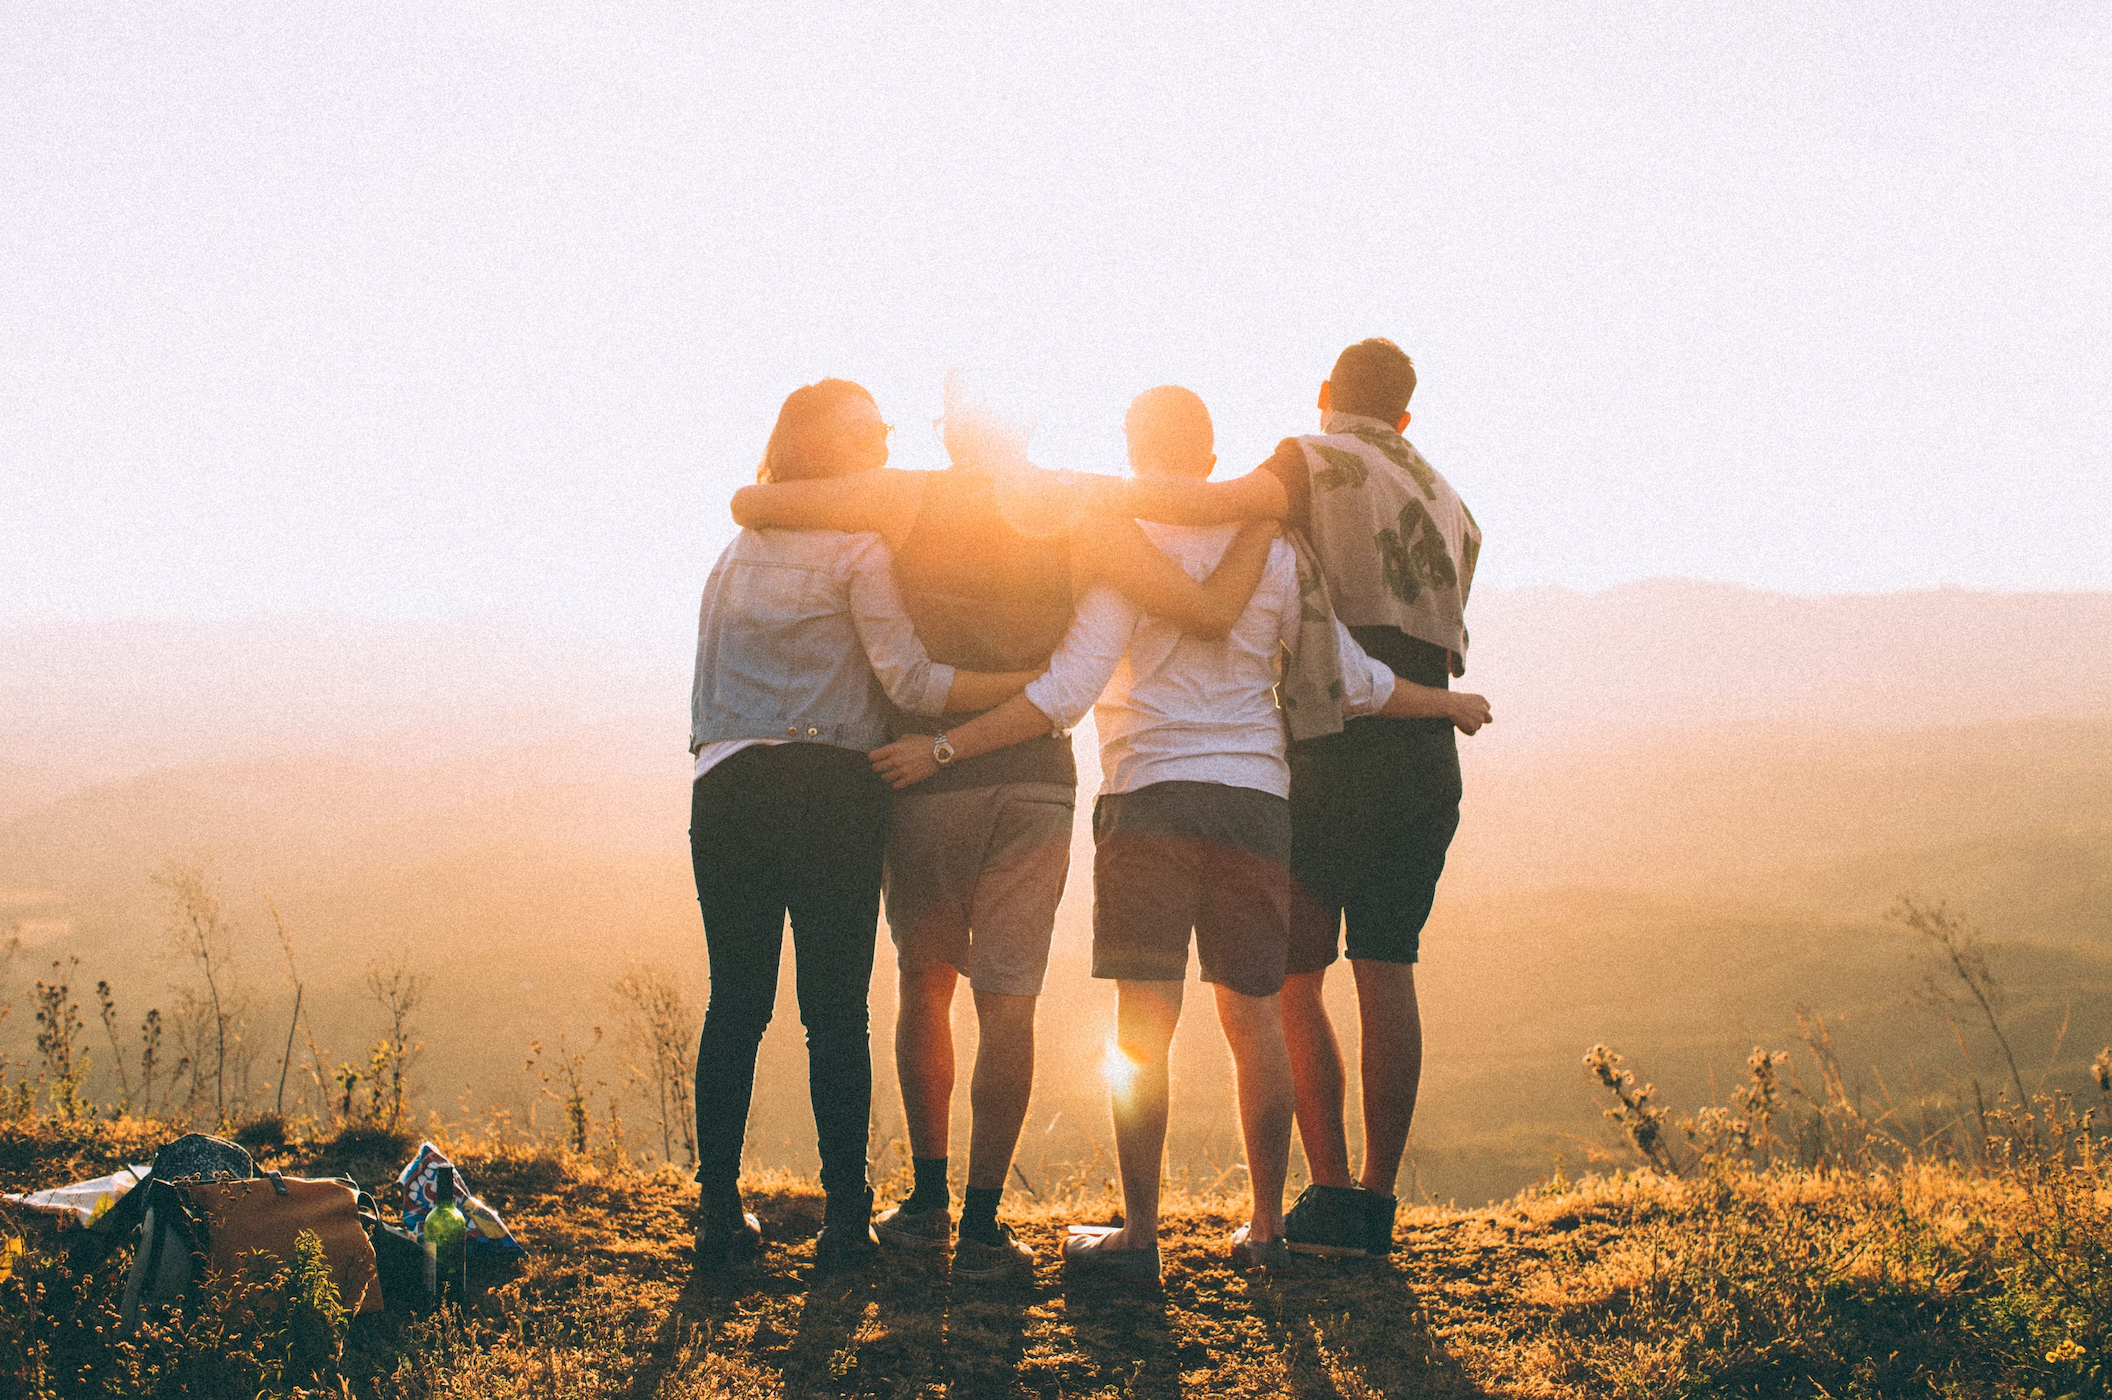 Four people, holding each other, with backs to the camera looking towards a view. The sun is behind them.